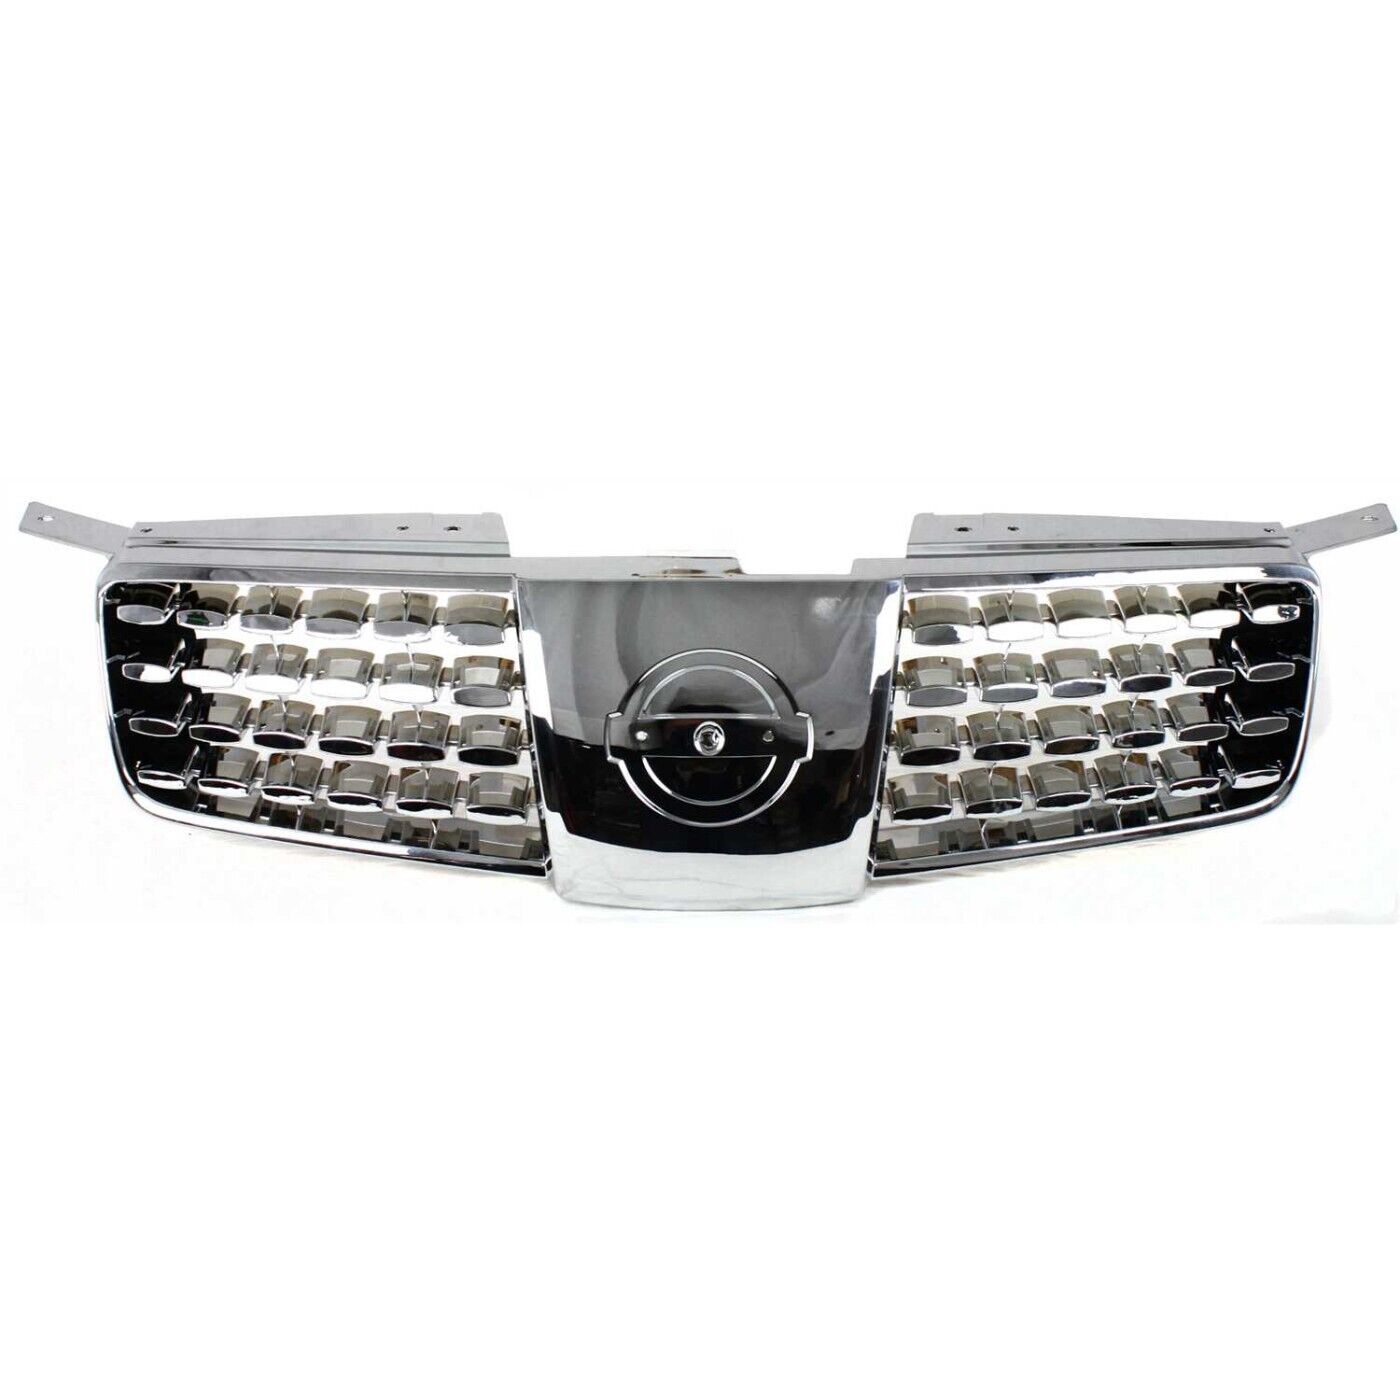 Grille For 2004-2006 Nissan Maxima Chrome Plastic